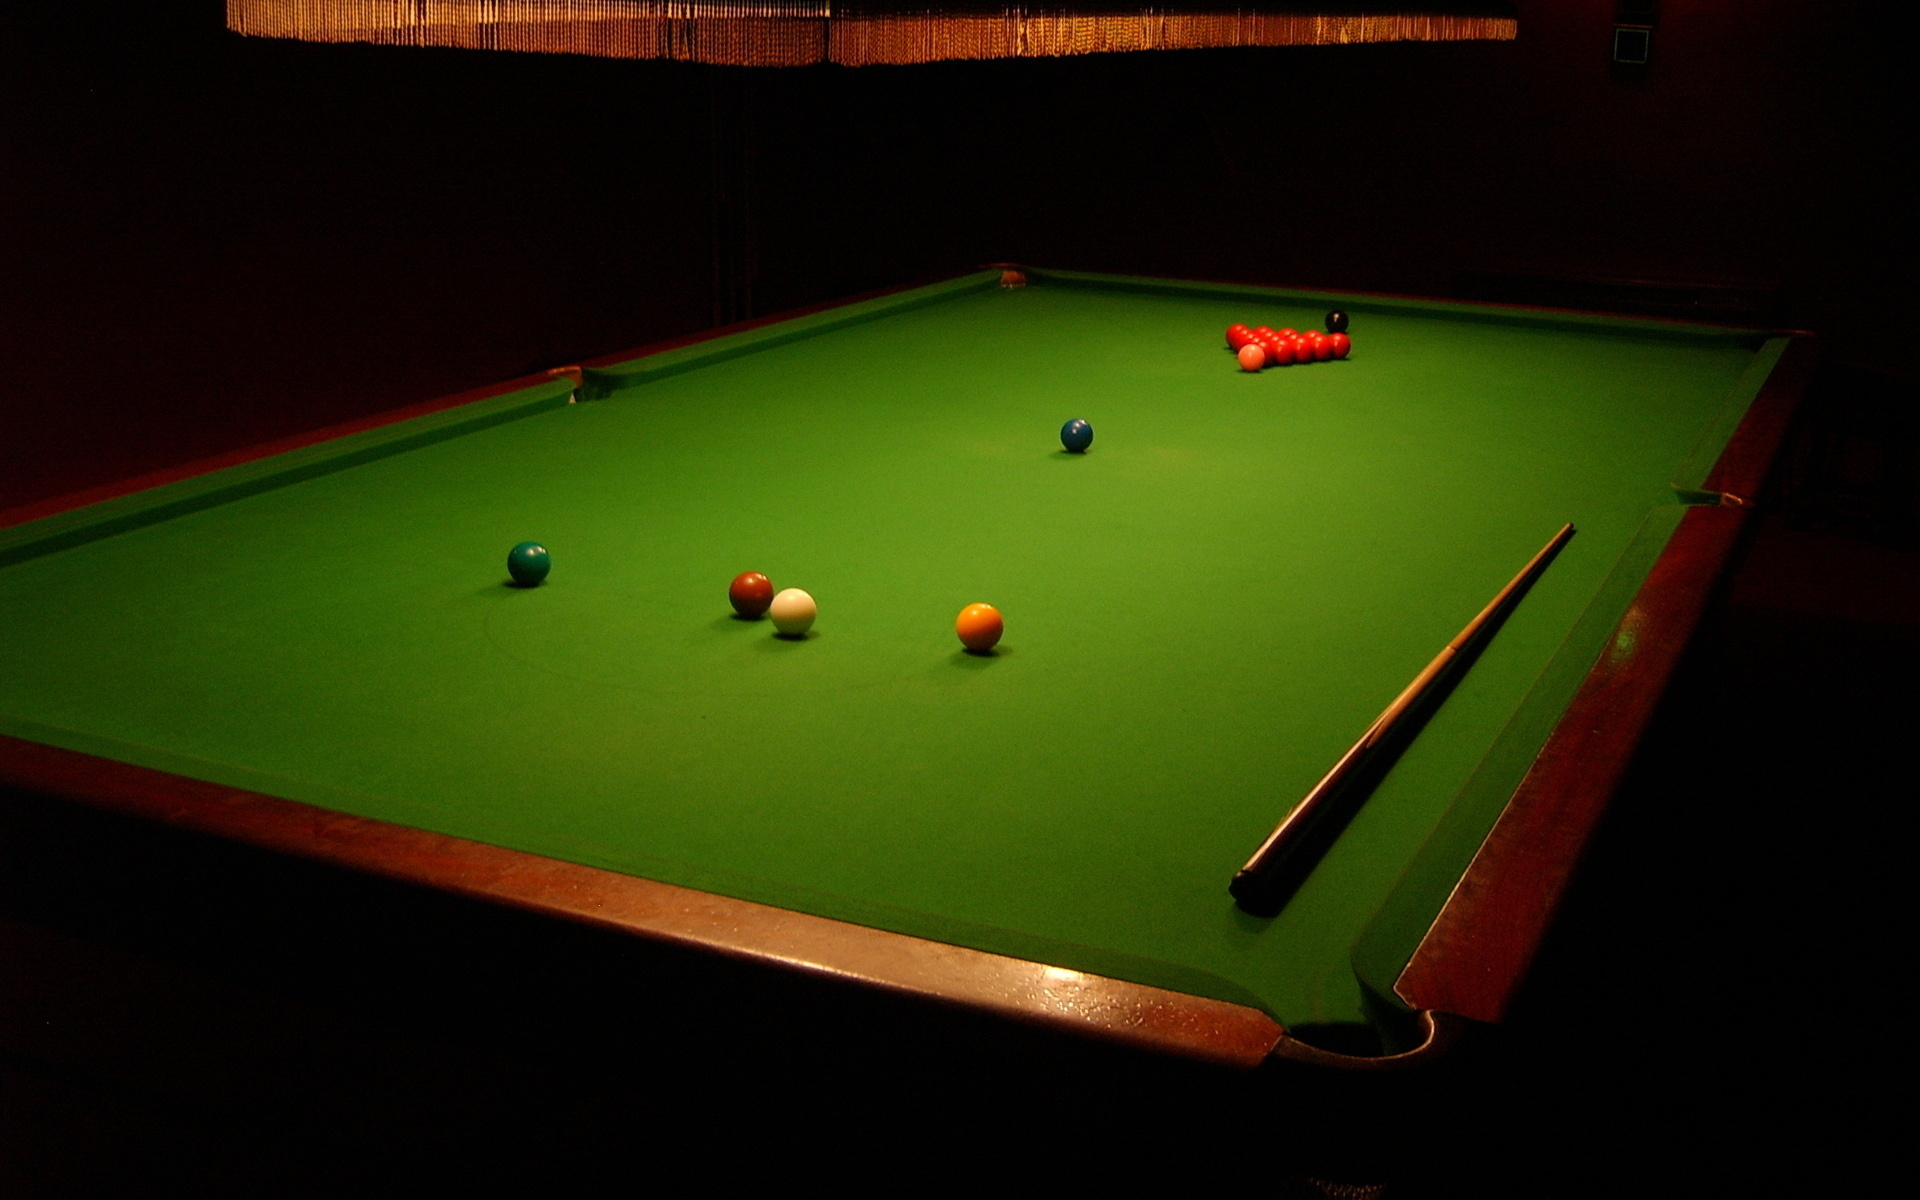 Snooker: A rectangular table covered with a green cloth called baize - equipment for a classic English cue sport. 1920x1200 HD Background.